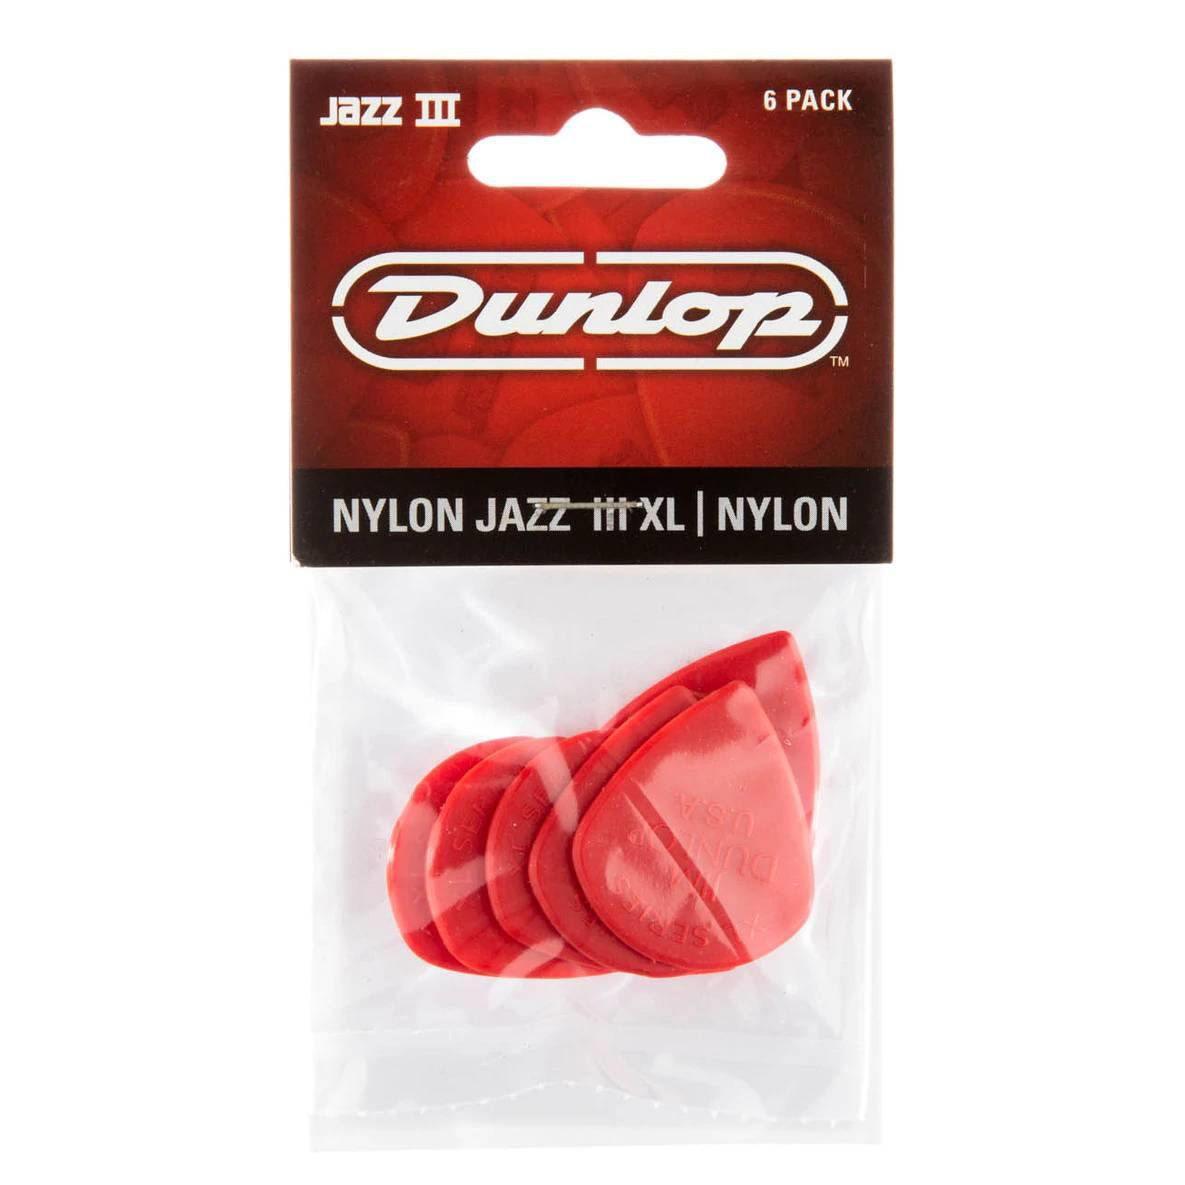 Nylon Jazz III XL Red Pack - Guitars - Picks by Dunlop at Muso's Stuff